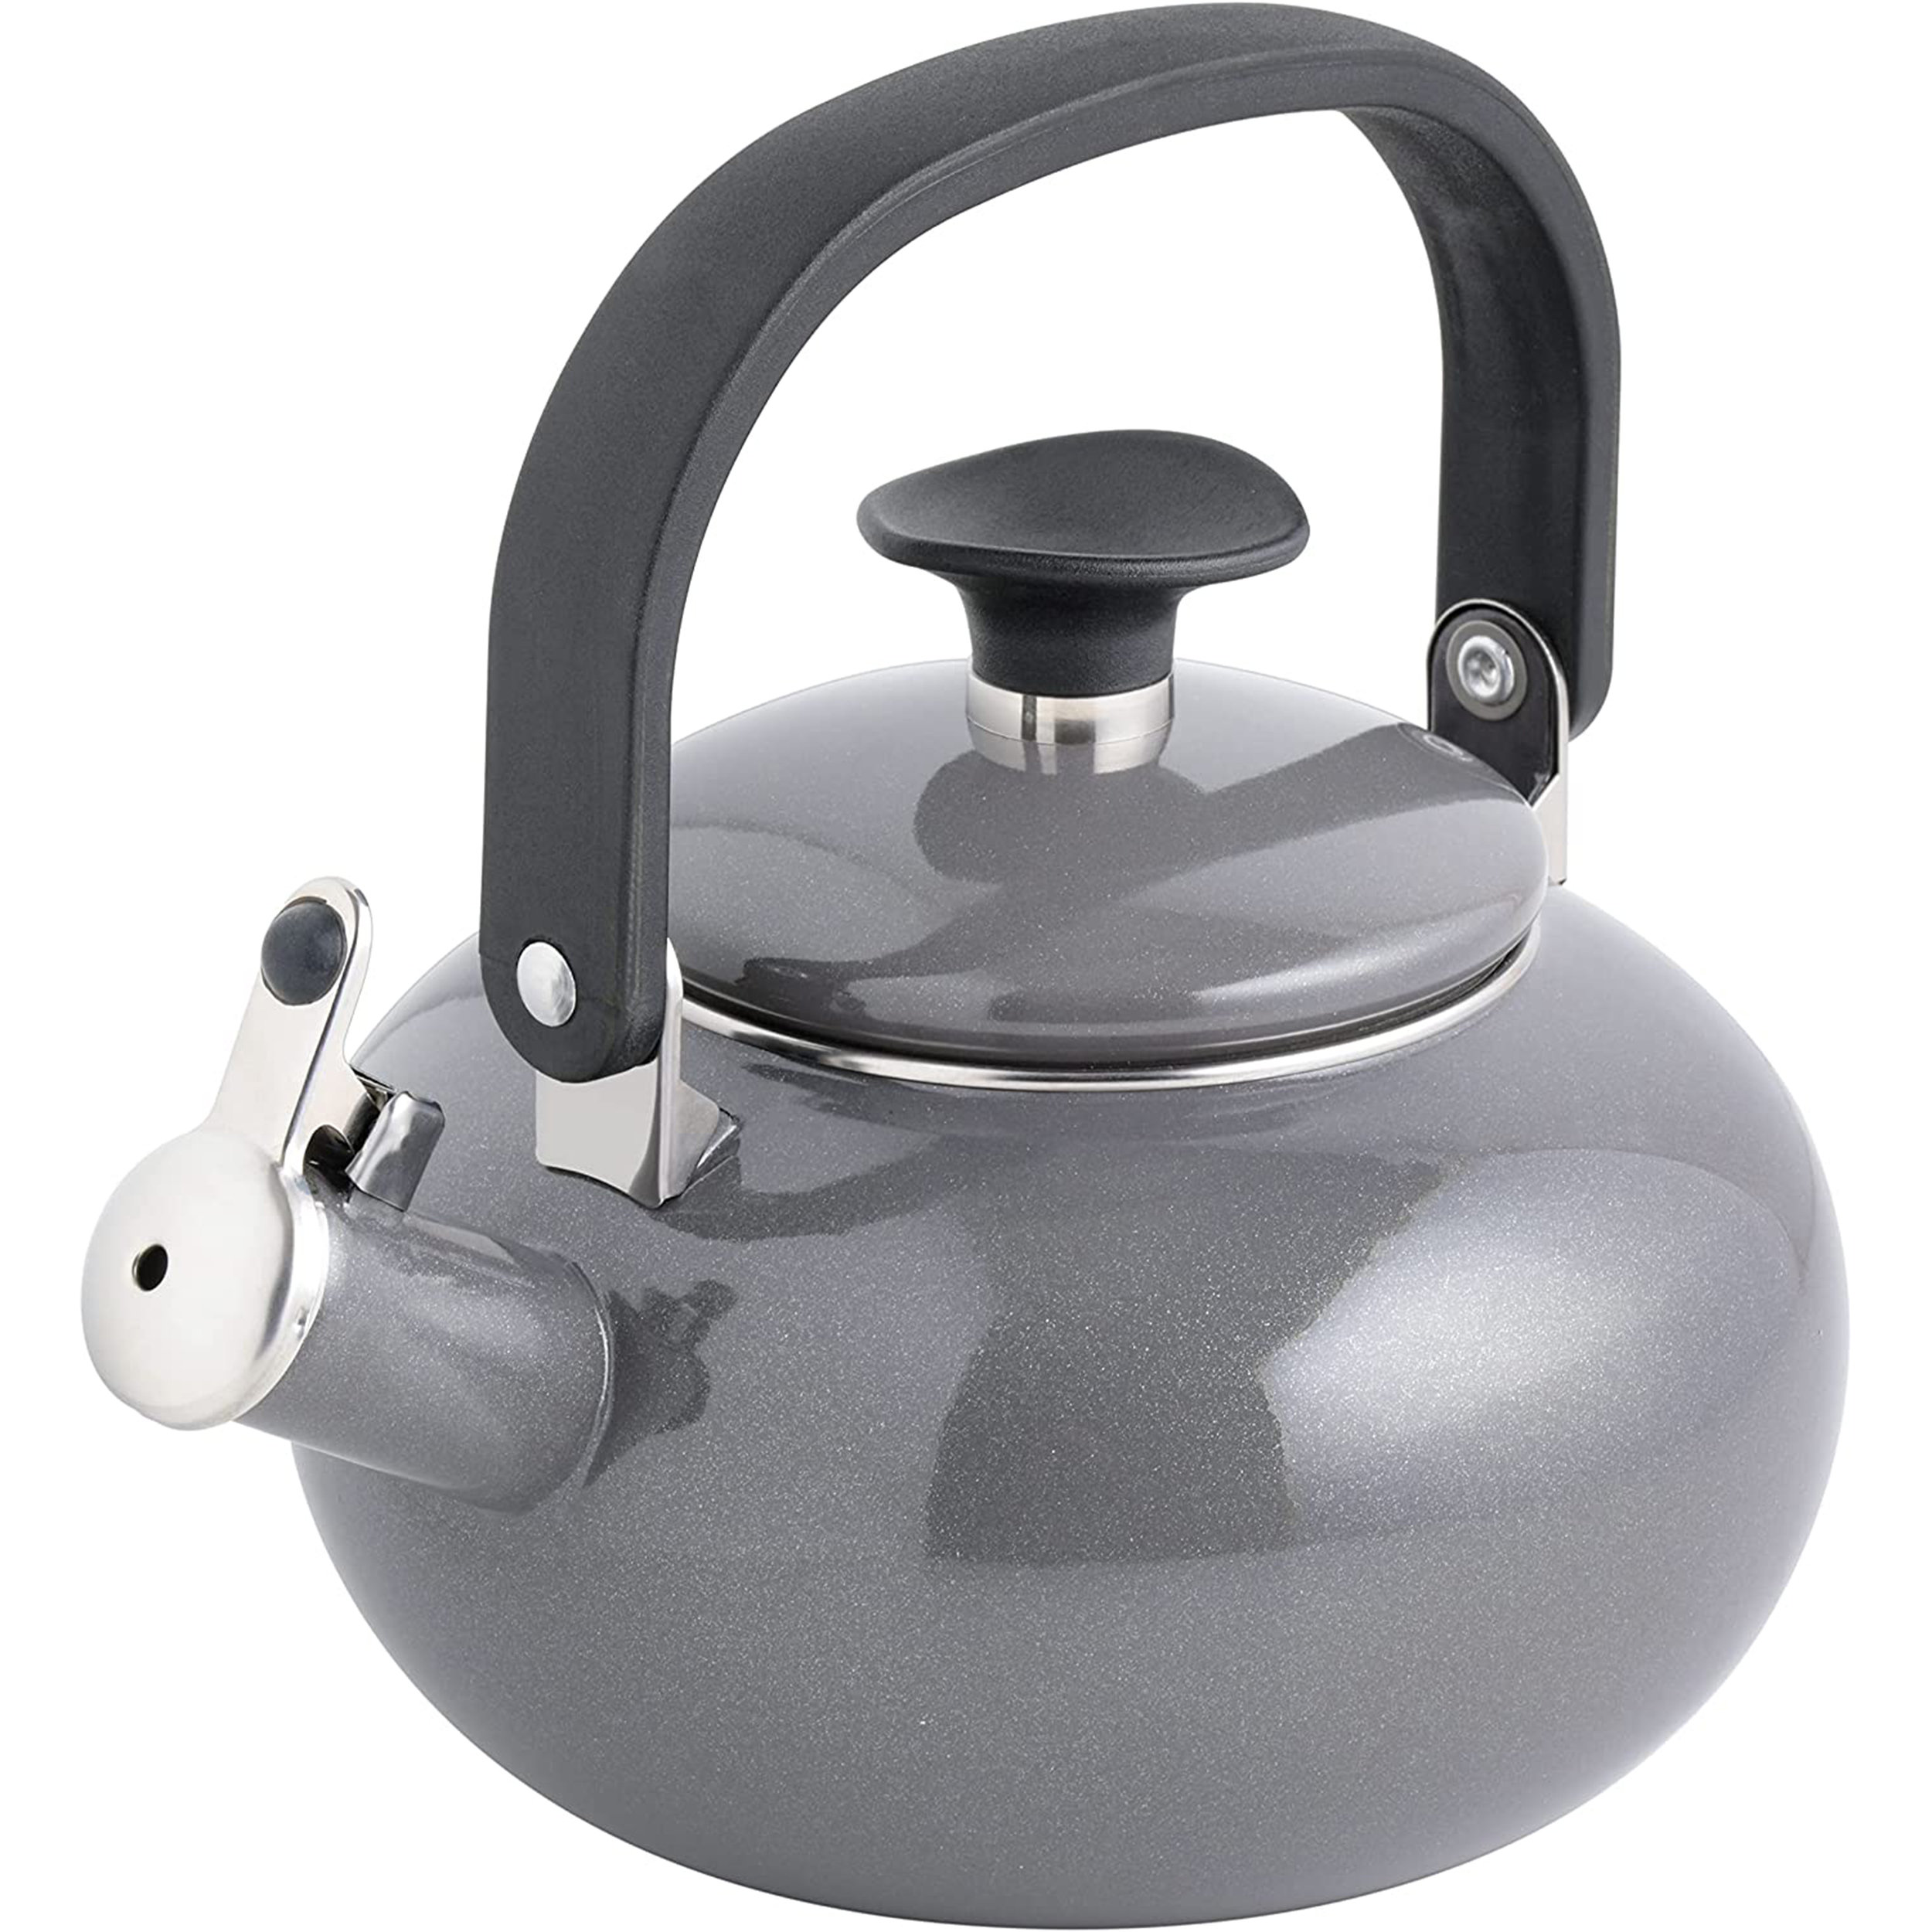 Stove Top Whistling Kettle, Stainless Steel Tea Kettle Teapot With